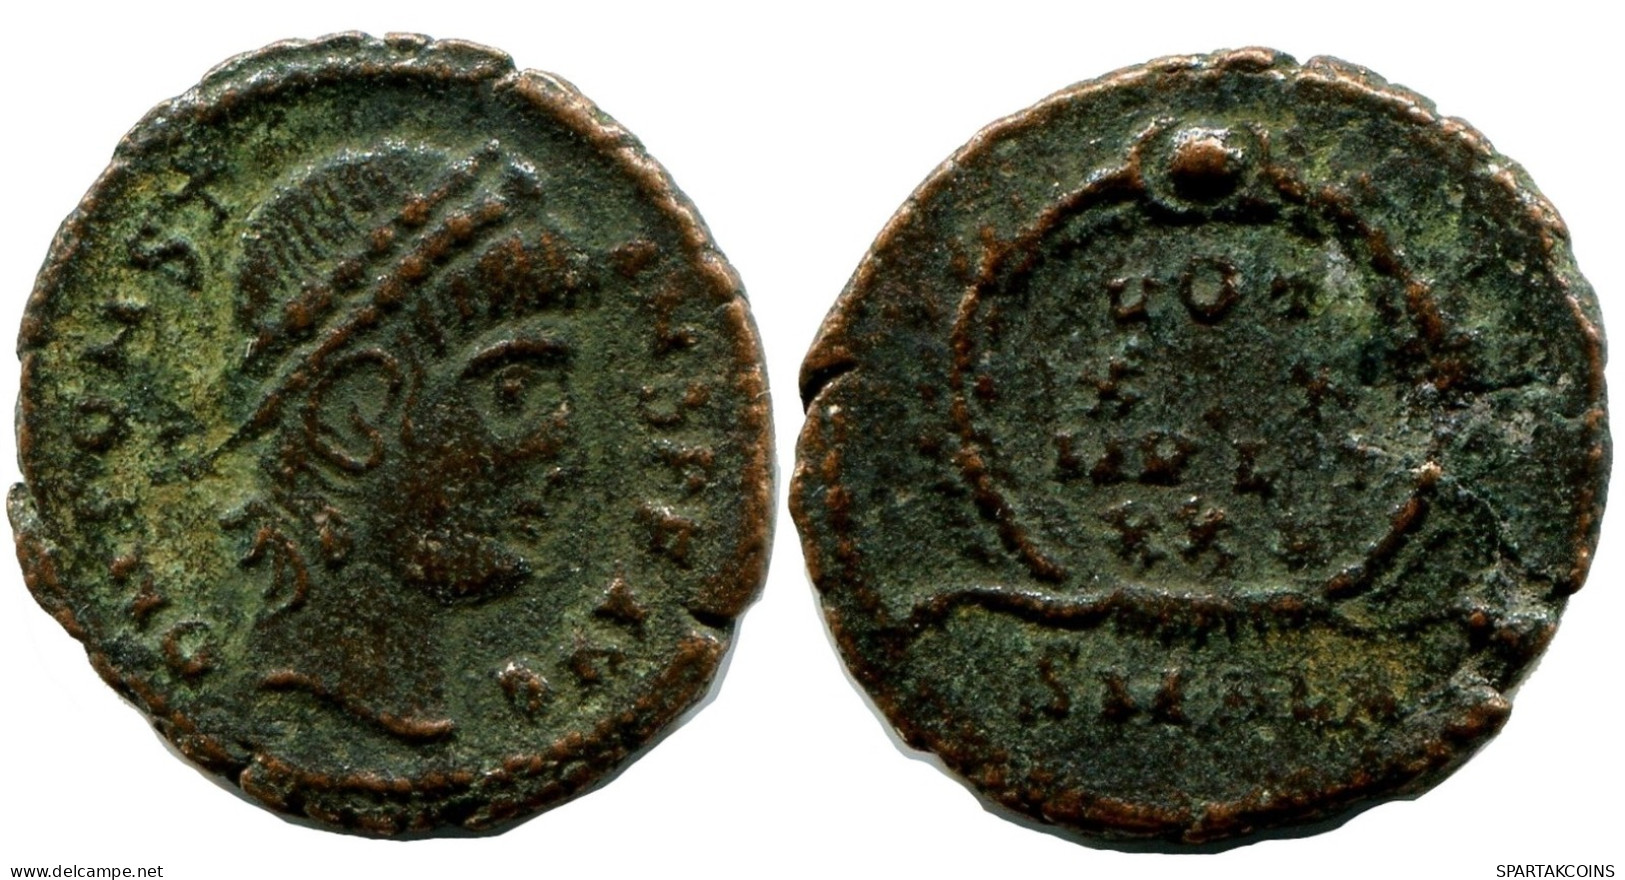 CONSTANS MINTED IN ALEKSANDRIA FROM THE ROYAL ONTARIO MUSEUM #ANC11477.14.D.A - The Christian Empire (307 AD To 363 AD)